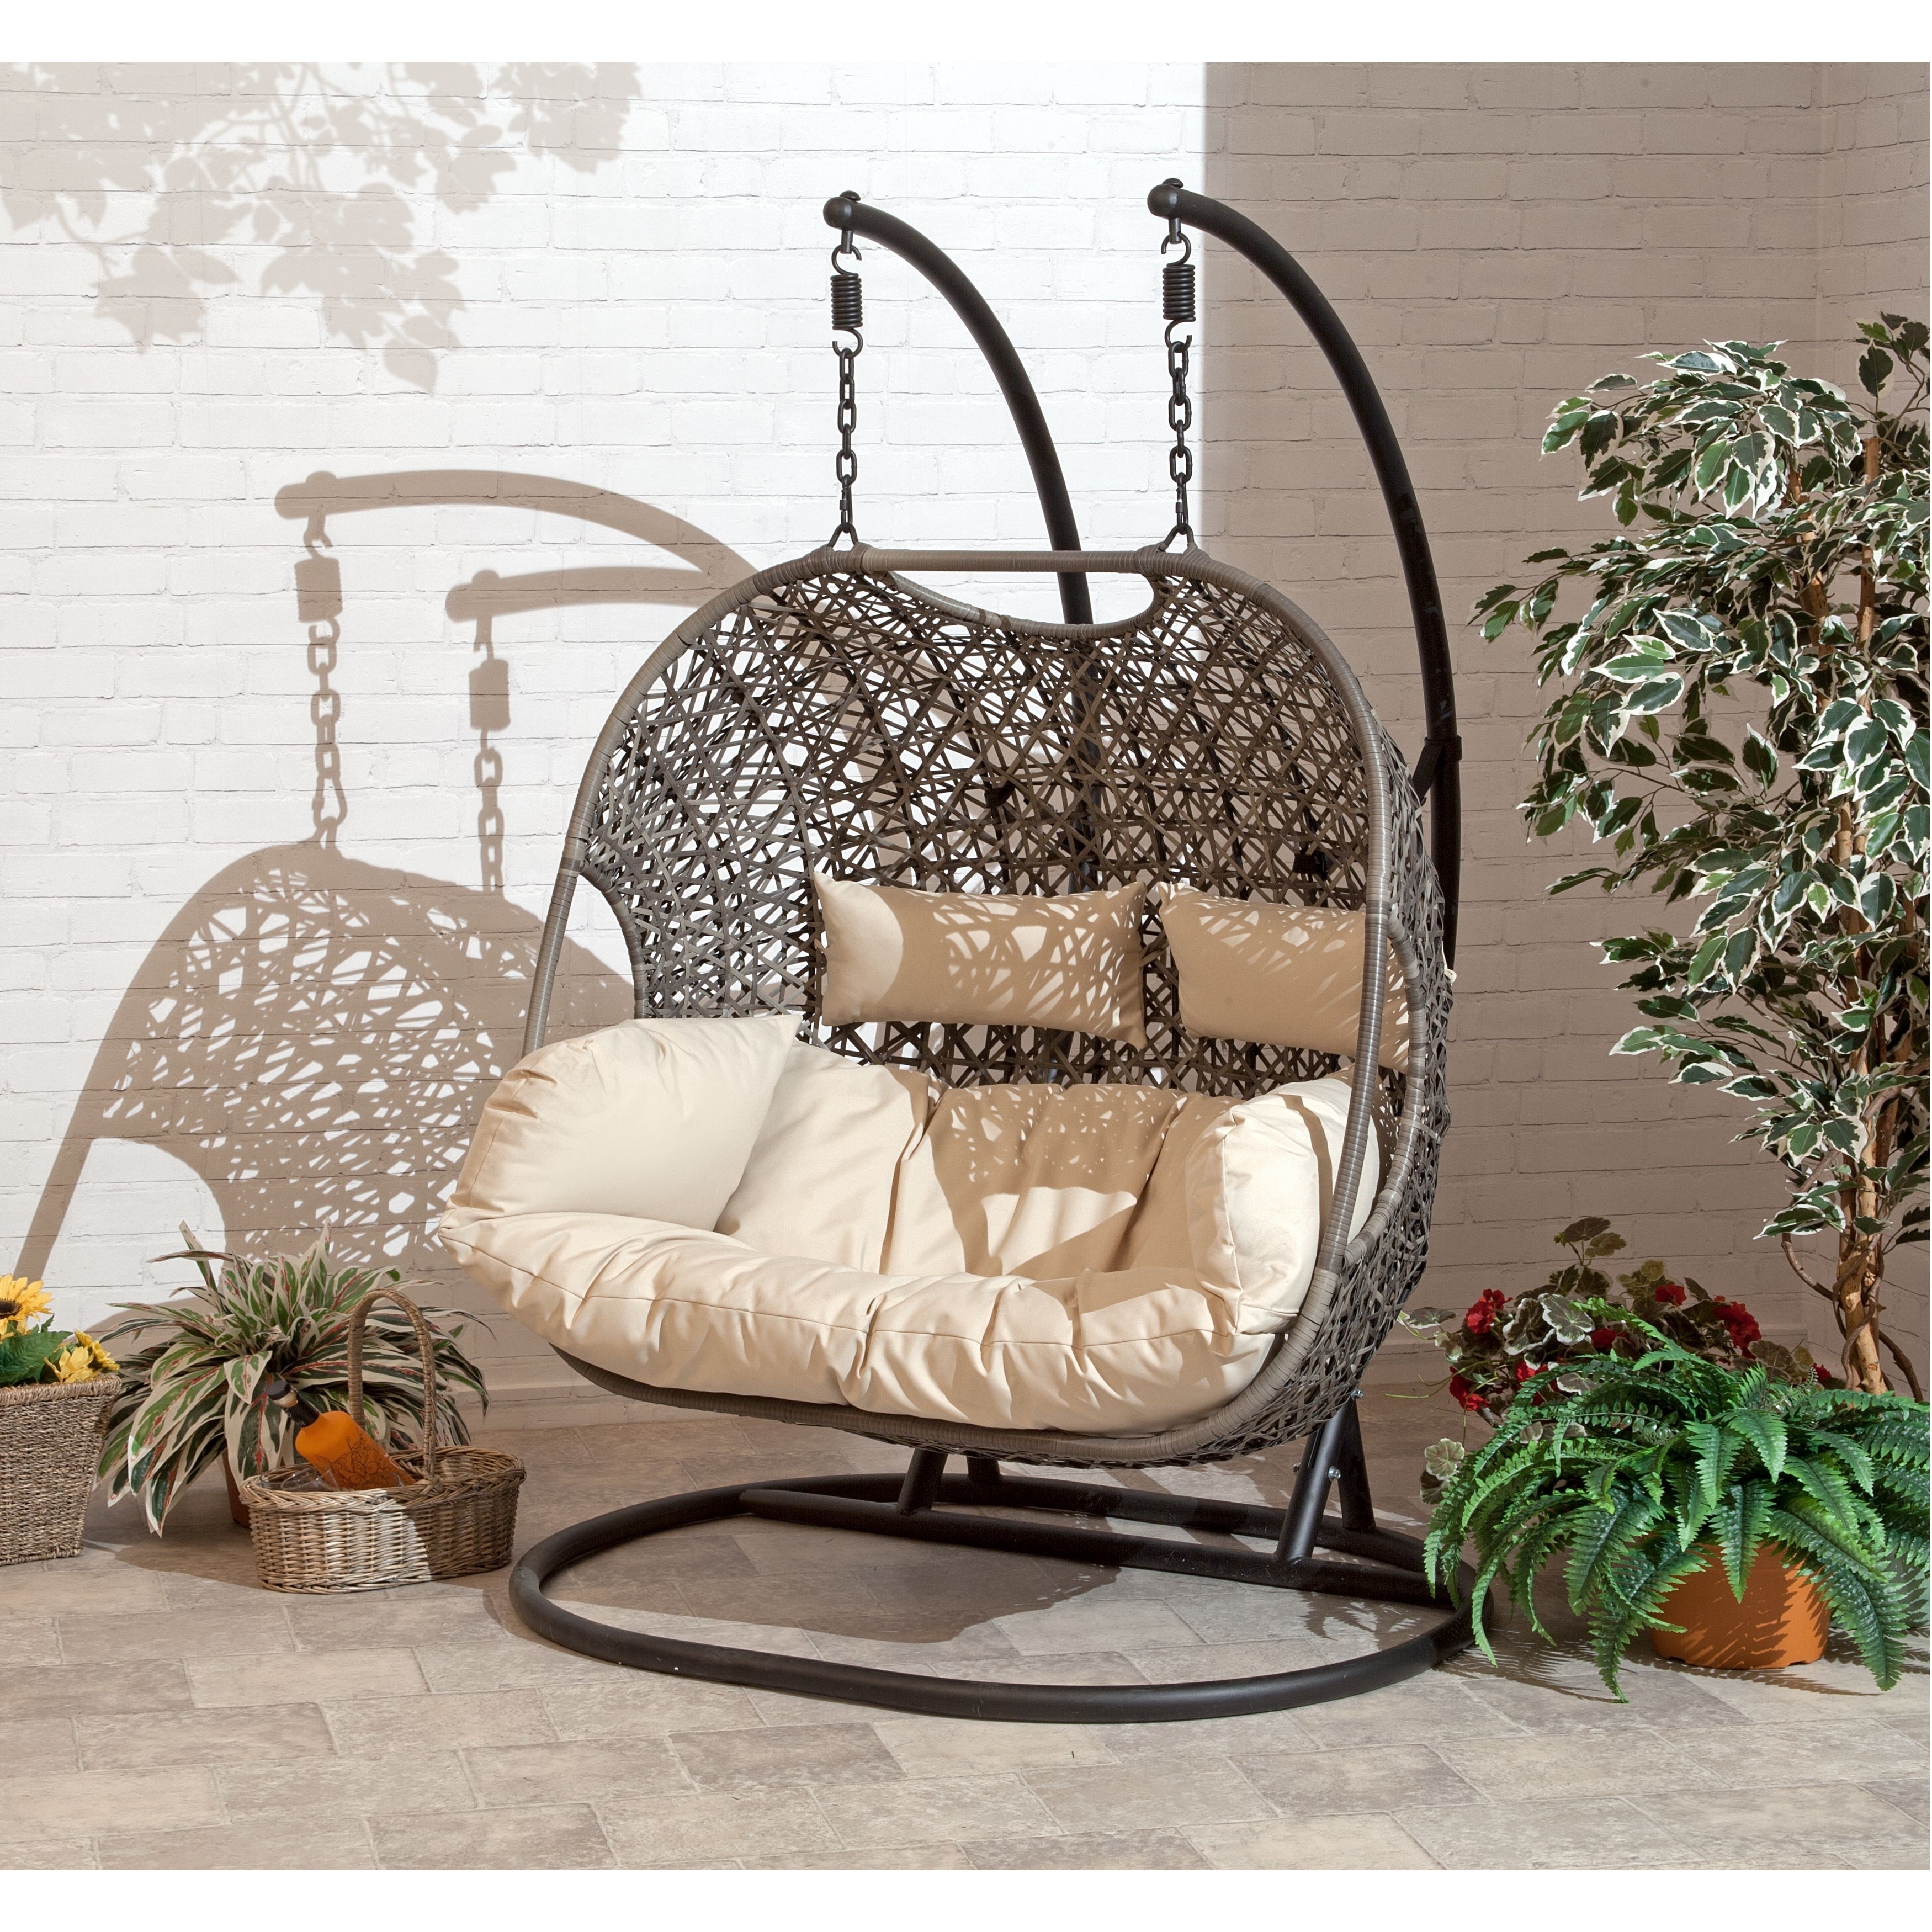 Shop Brampton Espresso Cocoon Hanging Chair/Swing Double with Beige Cushions - Free Shipping 